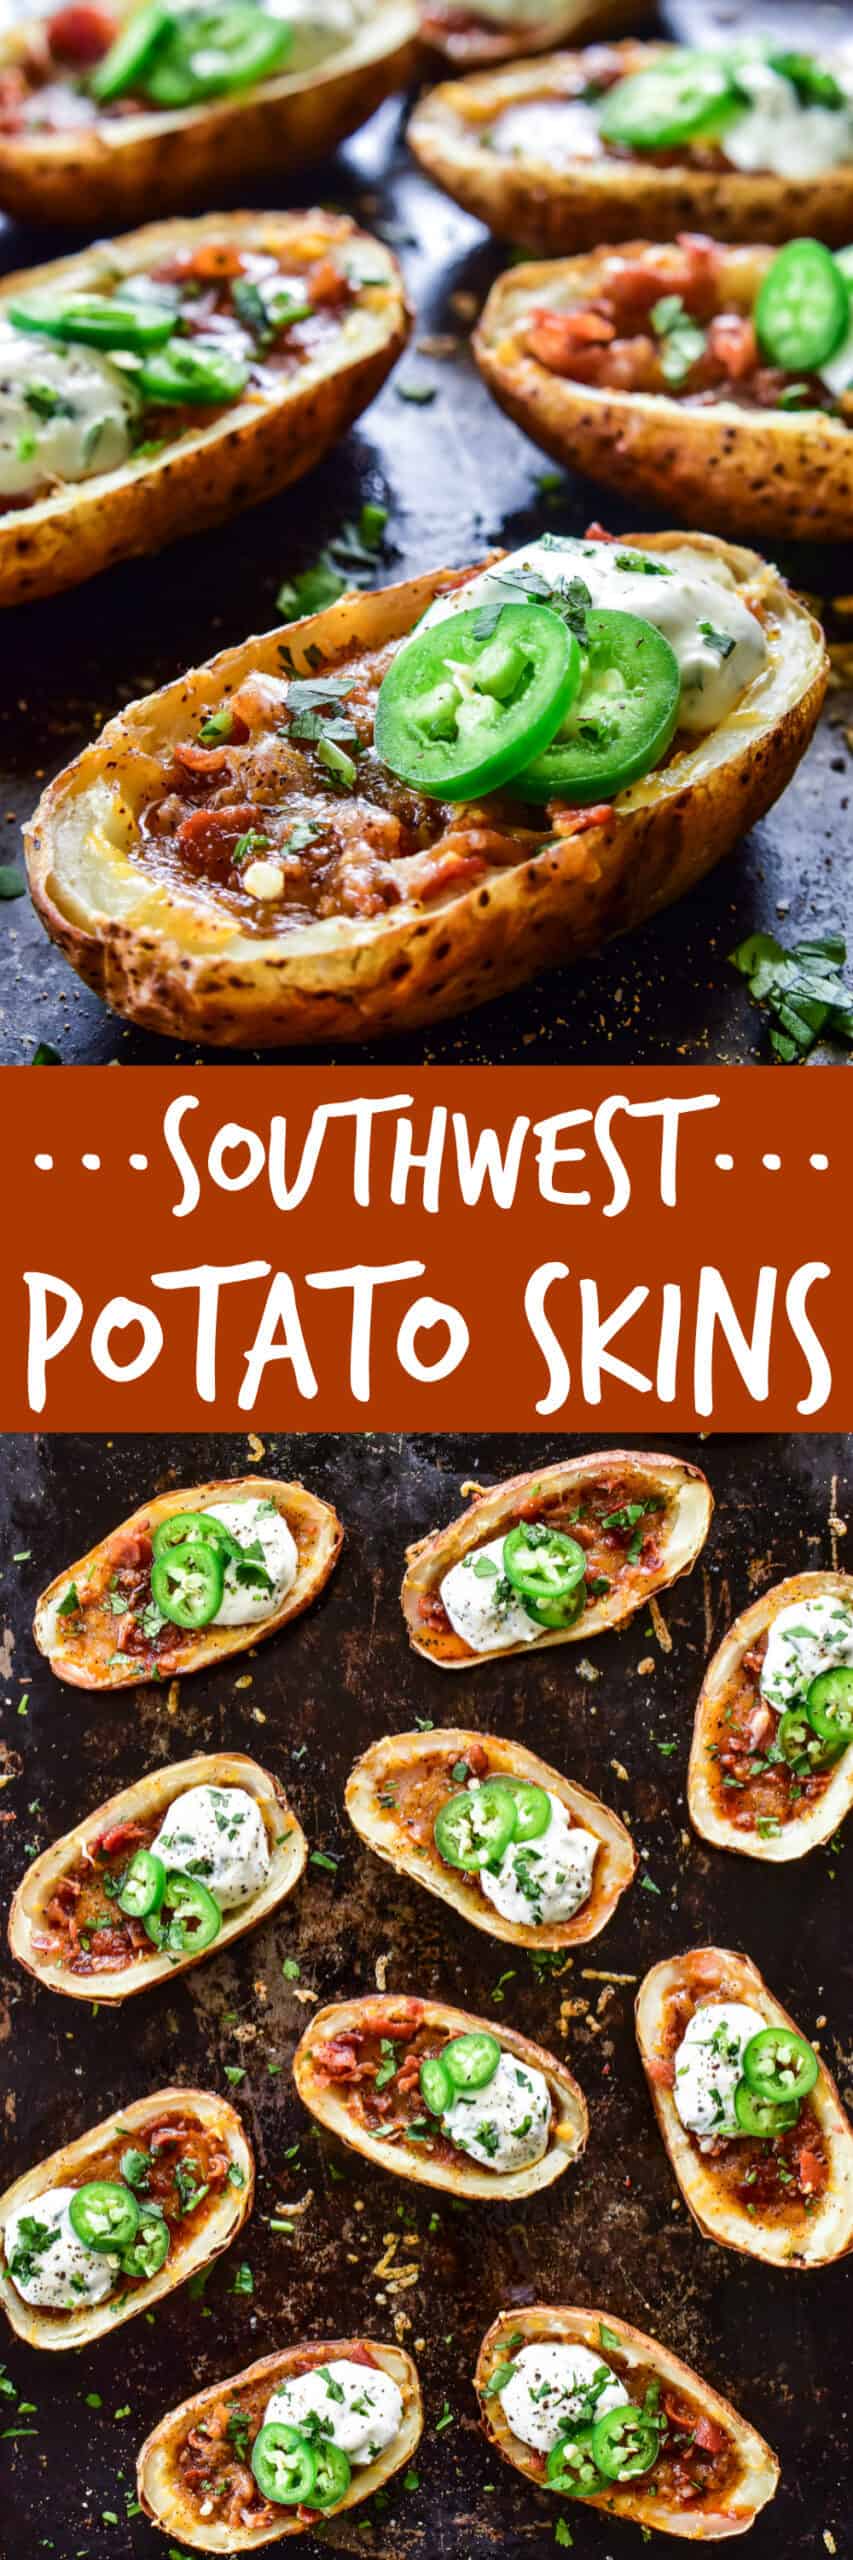 Collage image of Loaded Potato Skins